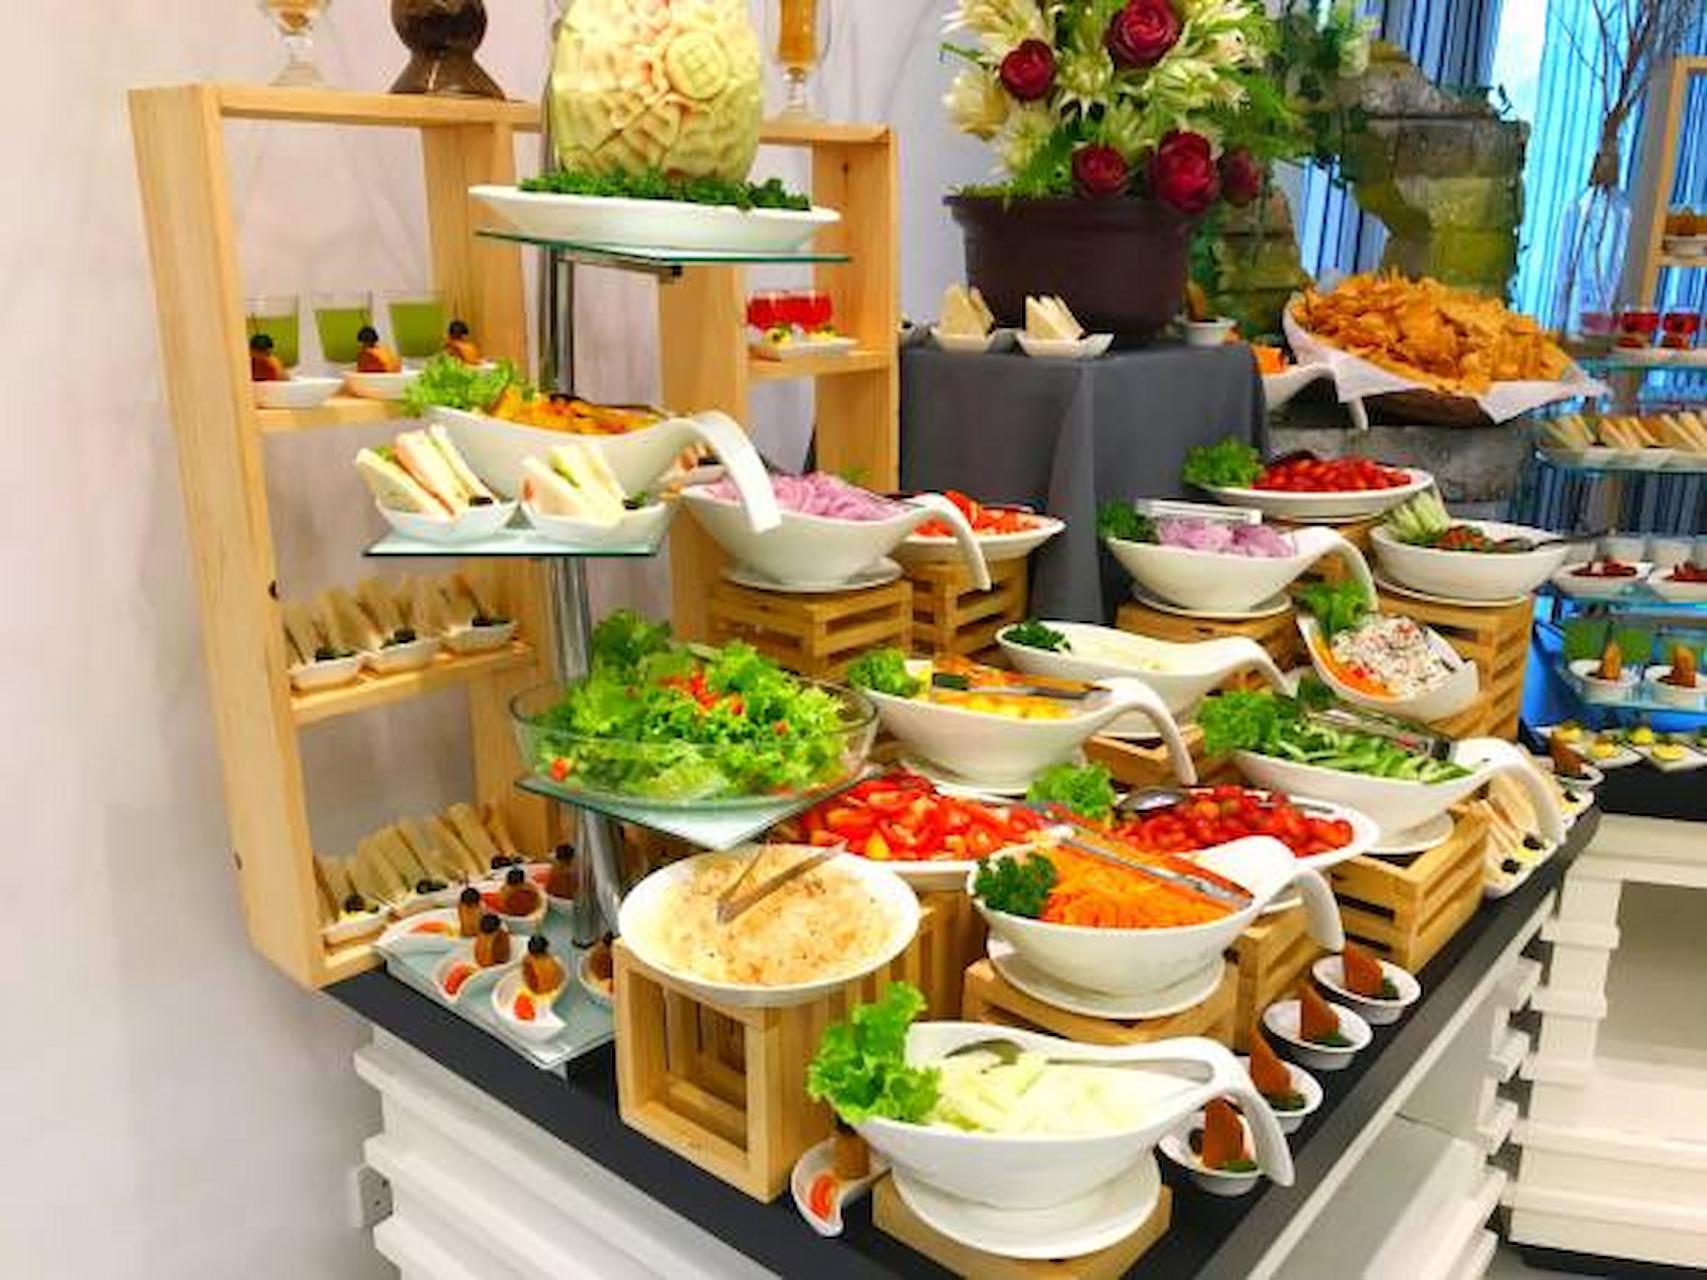 Buffet catering London should be fresh, innovative and provide exciting food